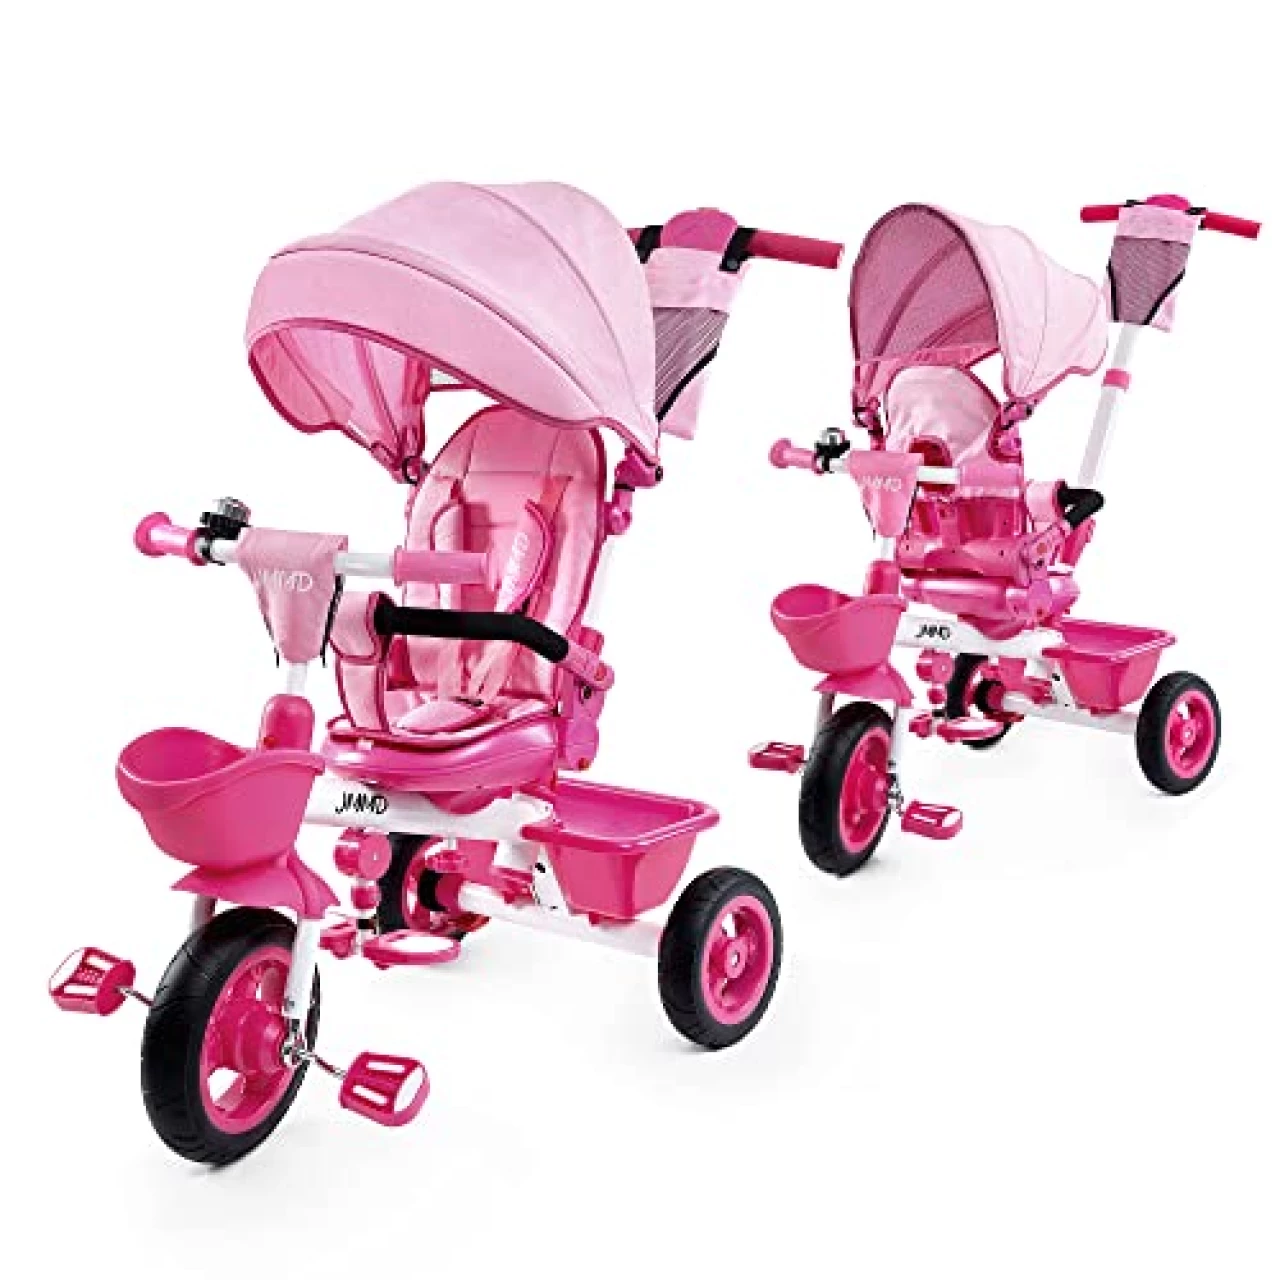 JMMD Baby Trike, 6-in-1 Kids Tricycle with Adjustable Push Handle, Removable Canopy, Safety Harness